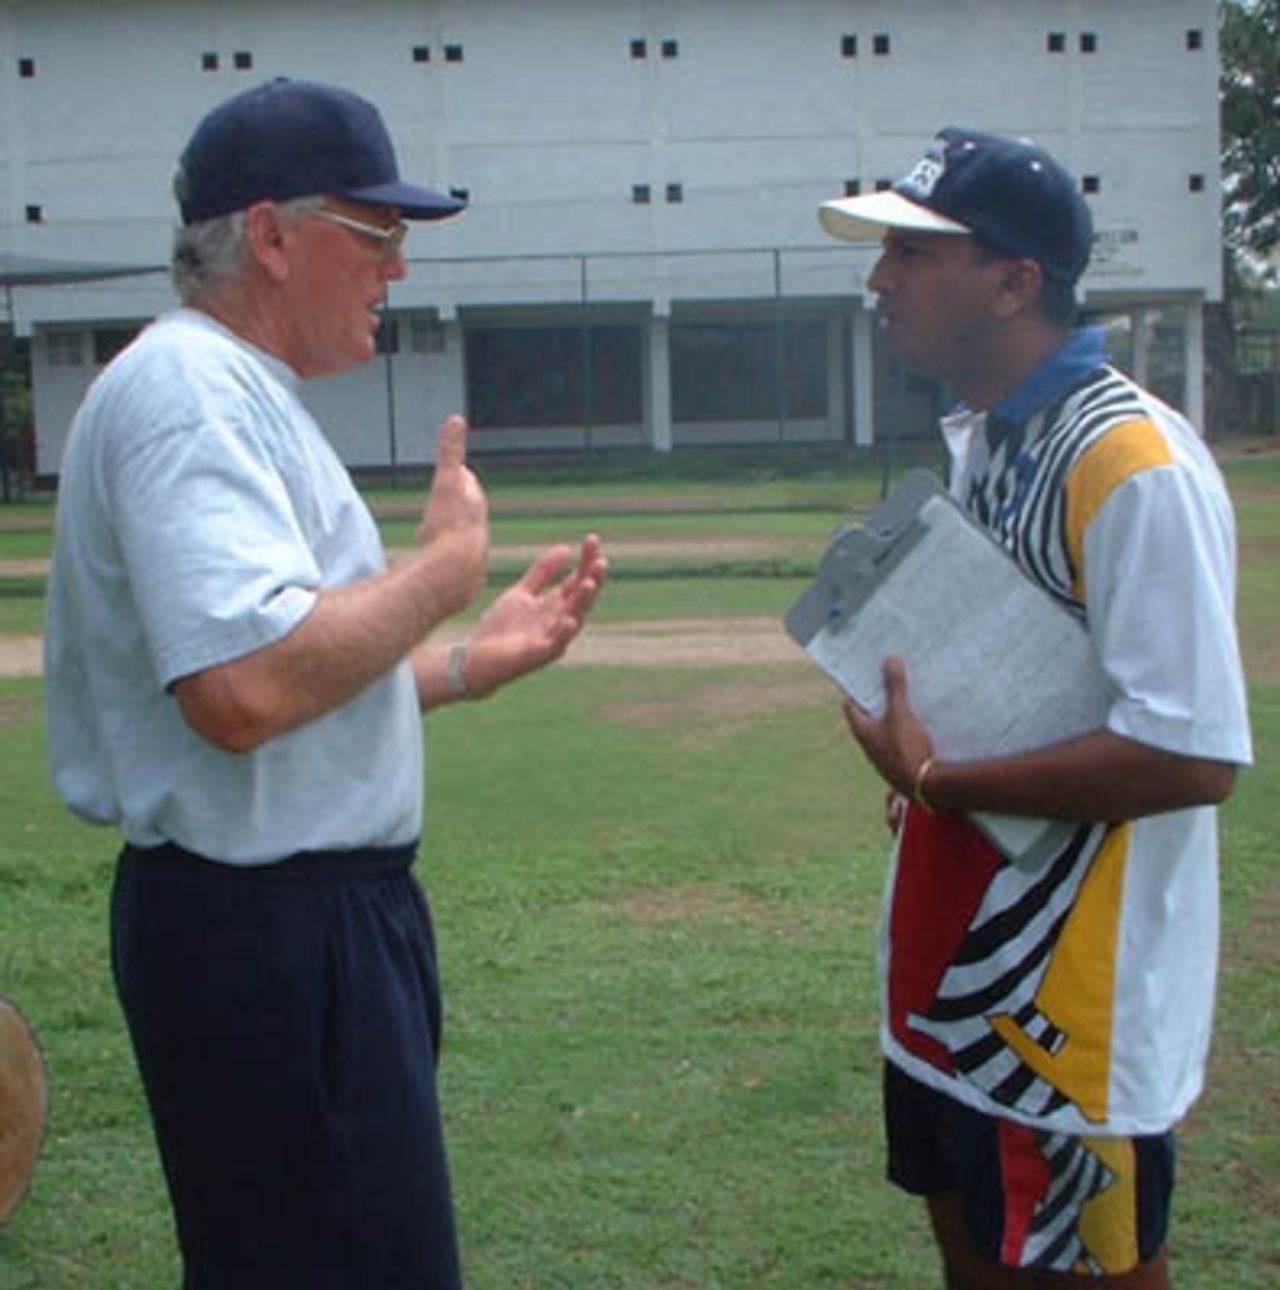 Barry Richards in discussion with the A team coach Roshan Mahanama.